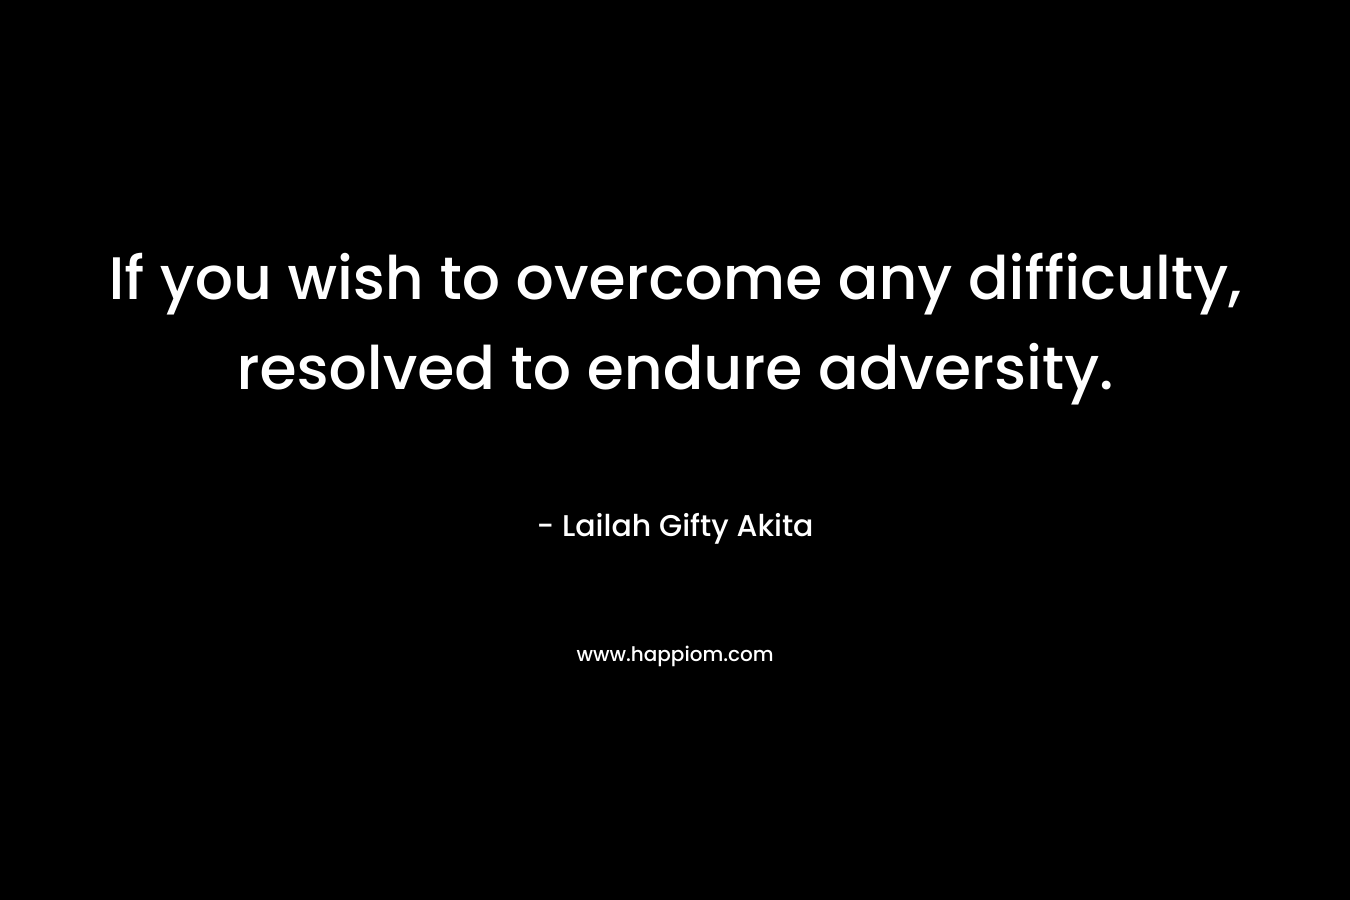 If you wish to overcome any difficulty, resolved to endure adversity. – Lailah Gifty Akita